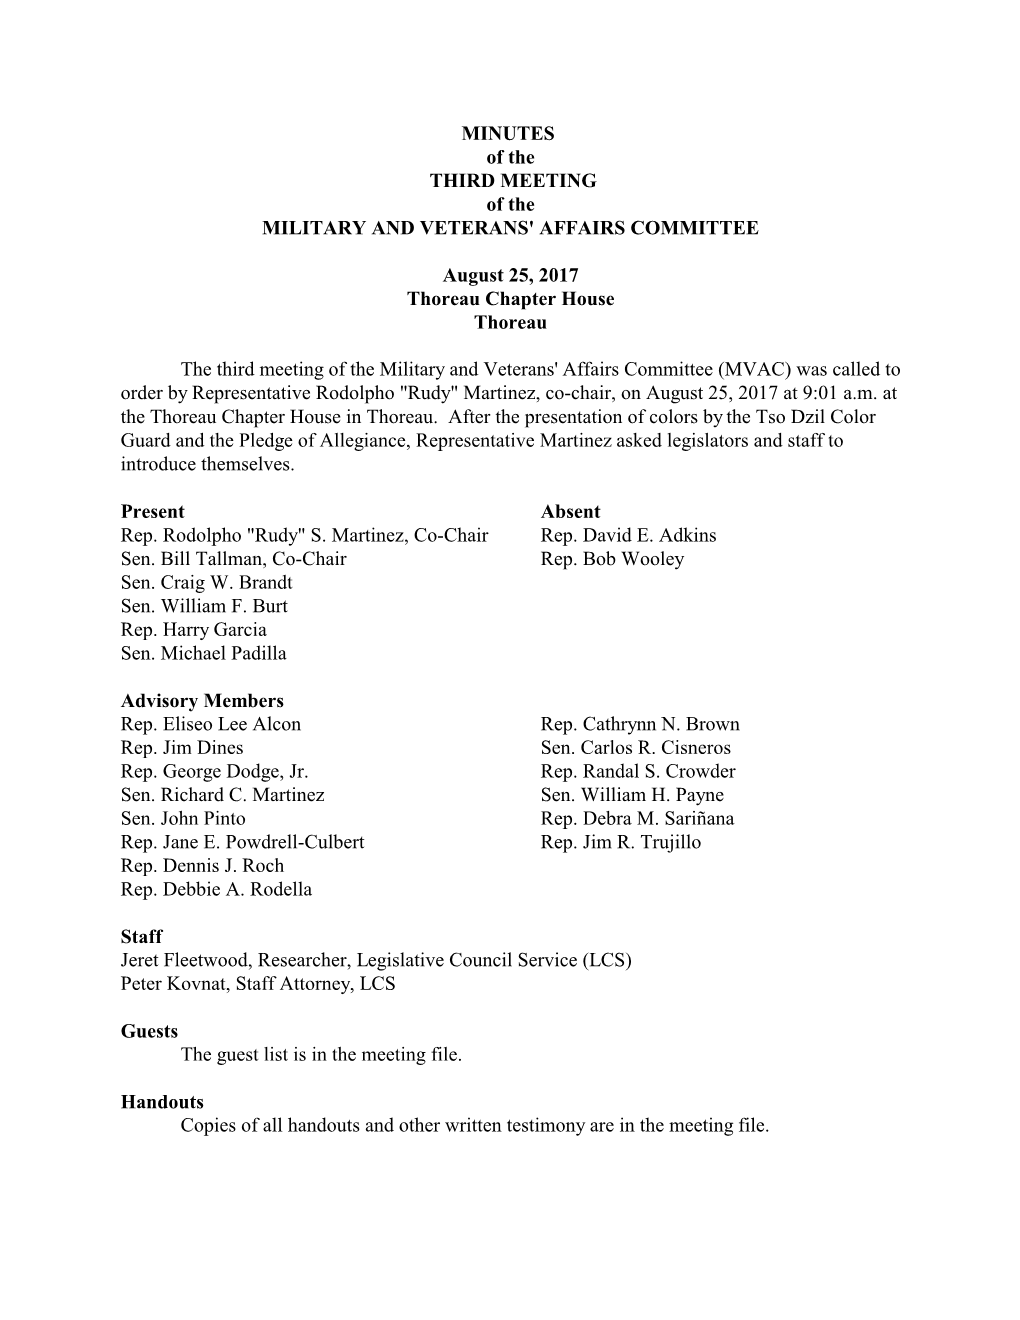 MINUTES of the THIRD MEETING of the MILITARY and VETERANS' AFFAIRS COMMITTEE